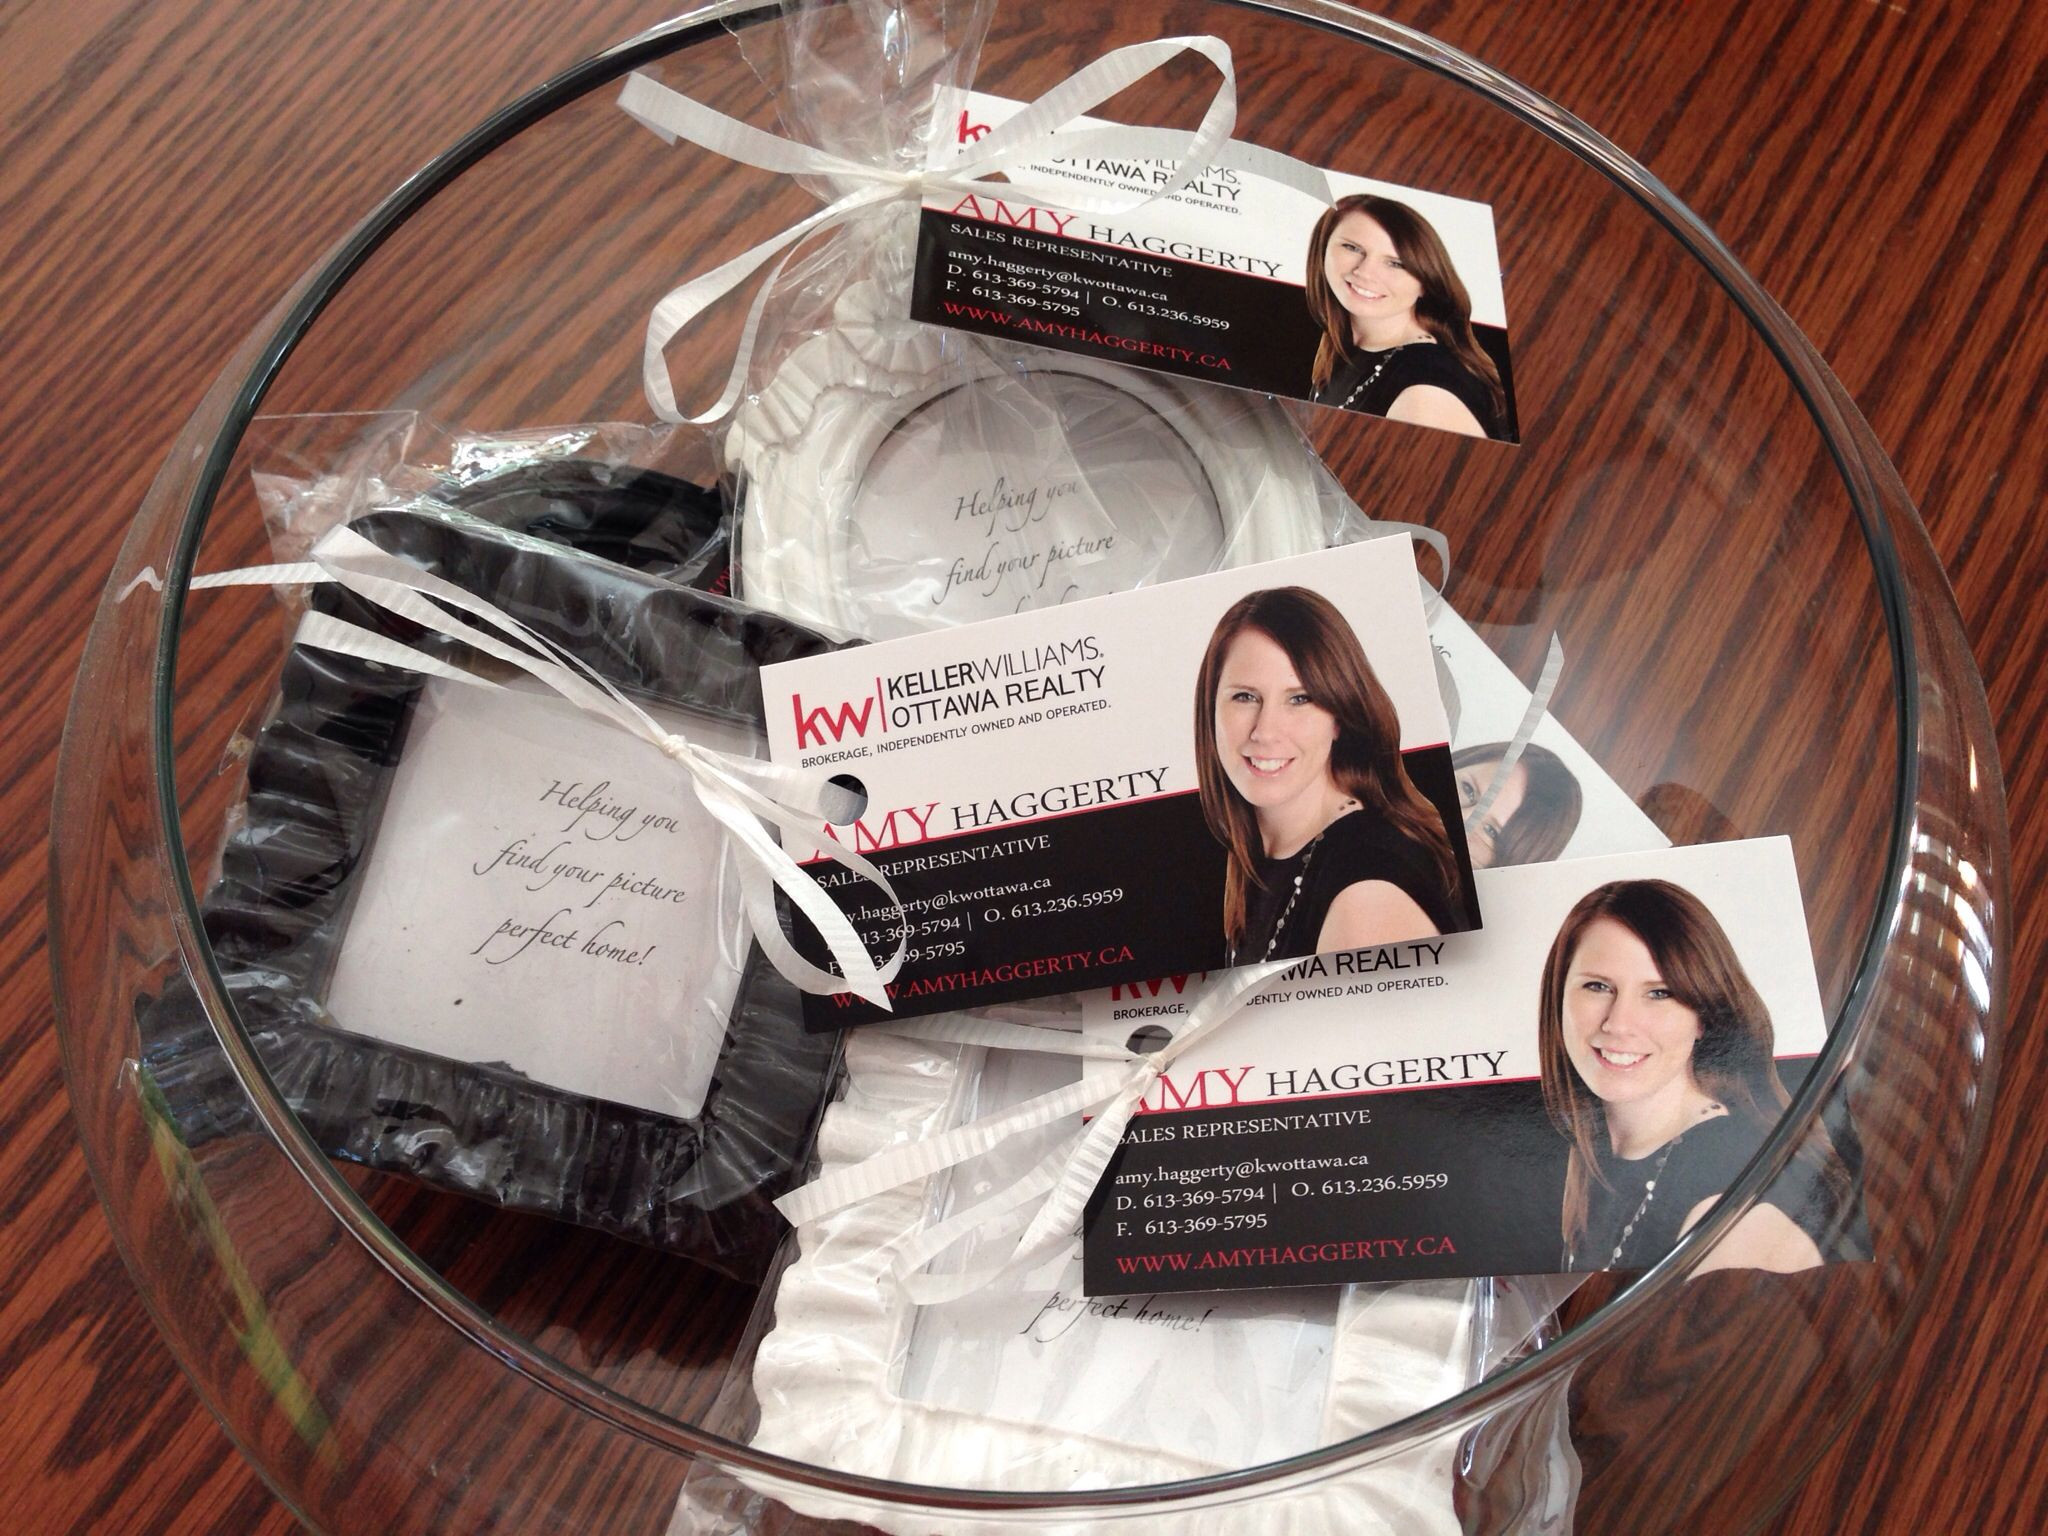 Thank You Gift Ideas For Real Estate Agent
 Open house giveaways Frames say "Helping you find your